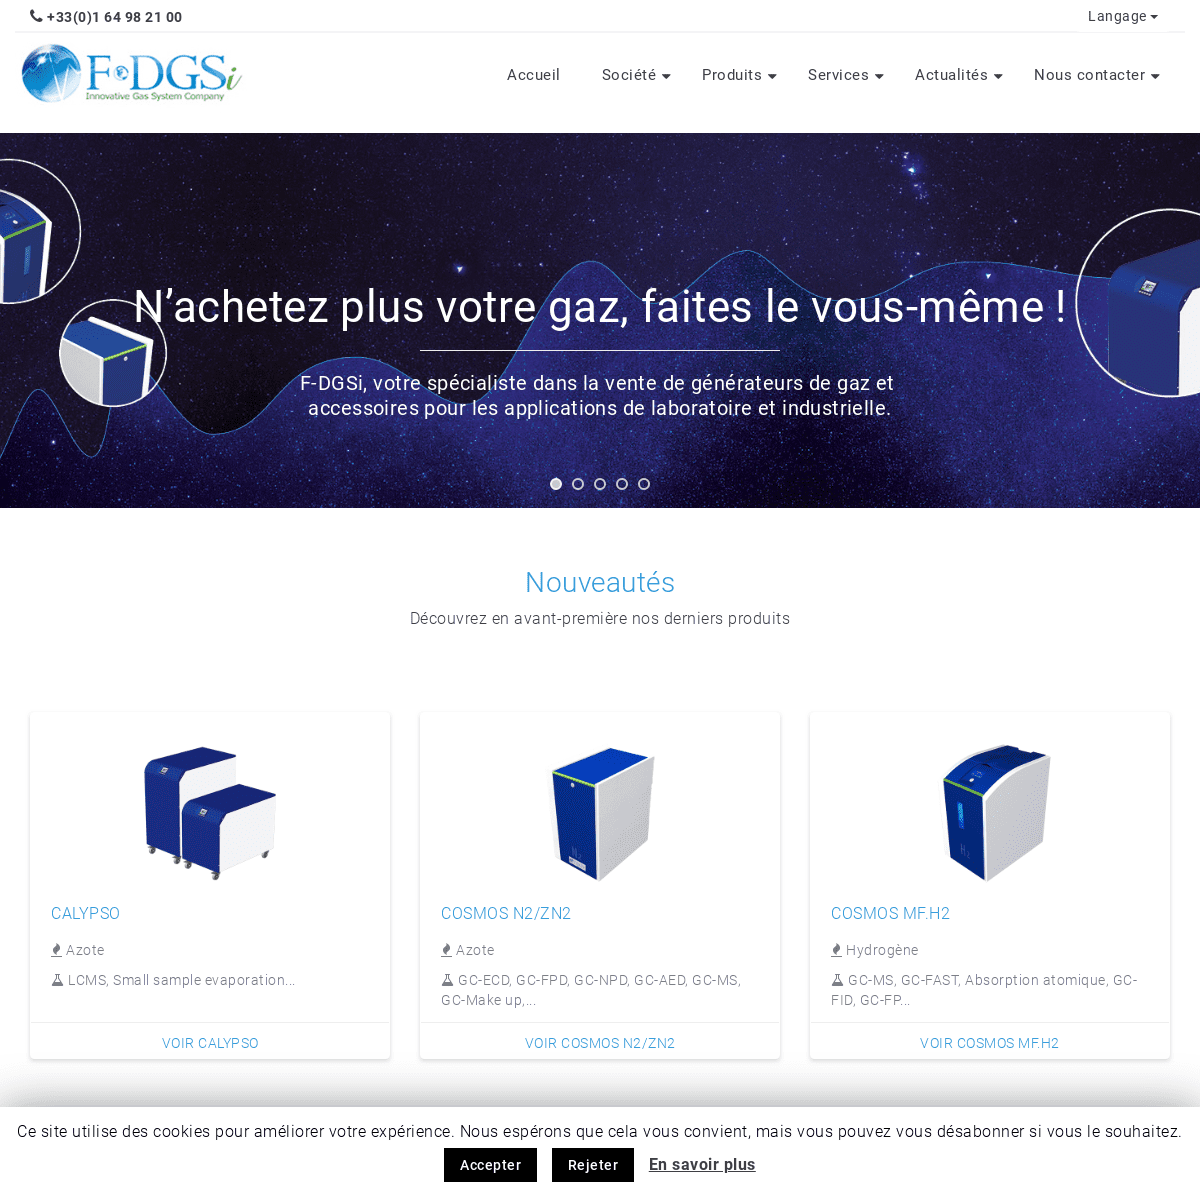 A complete backup of f-dgs.com